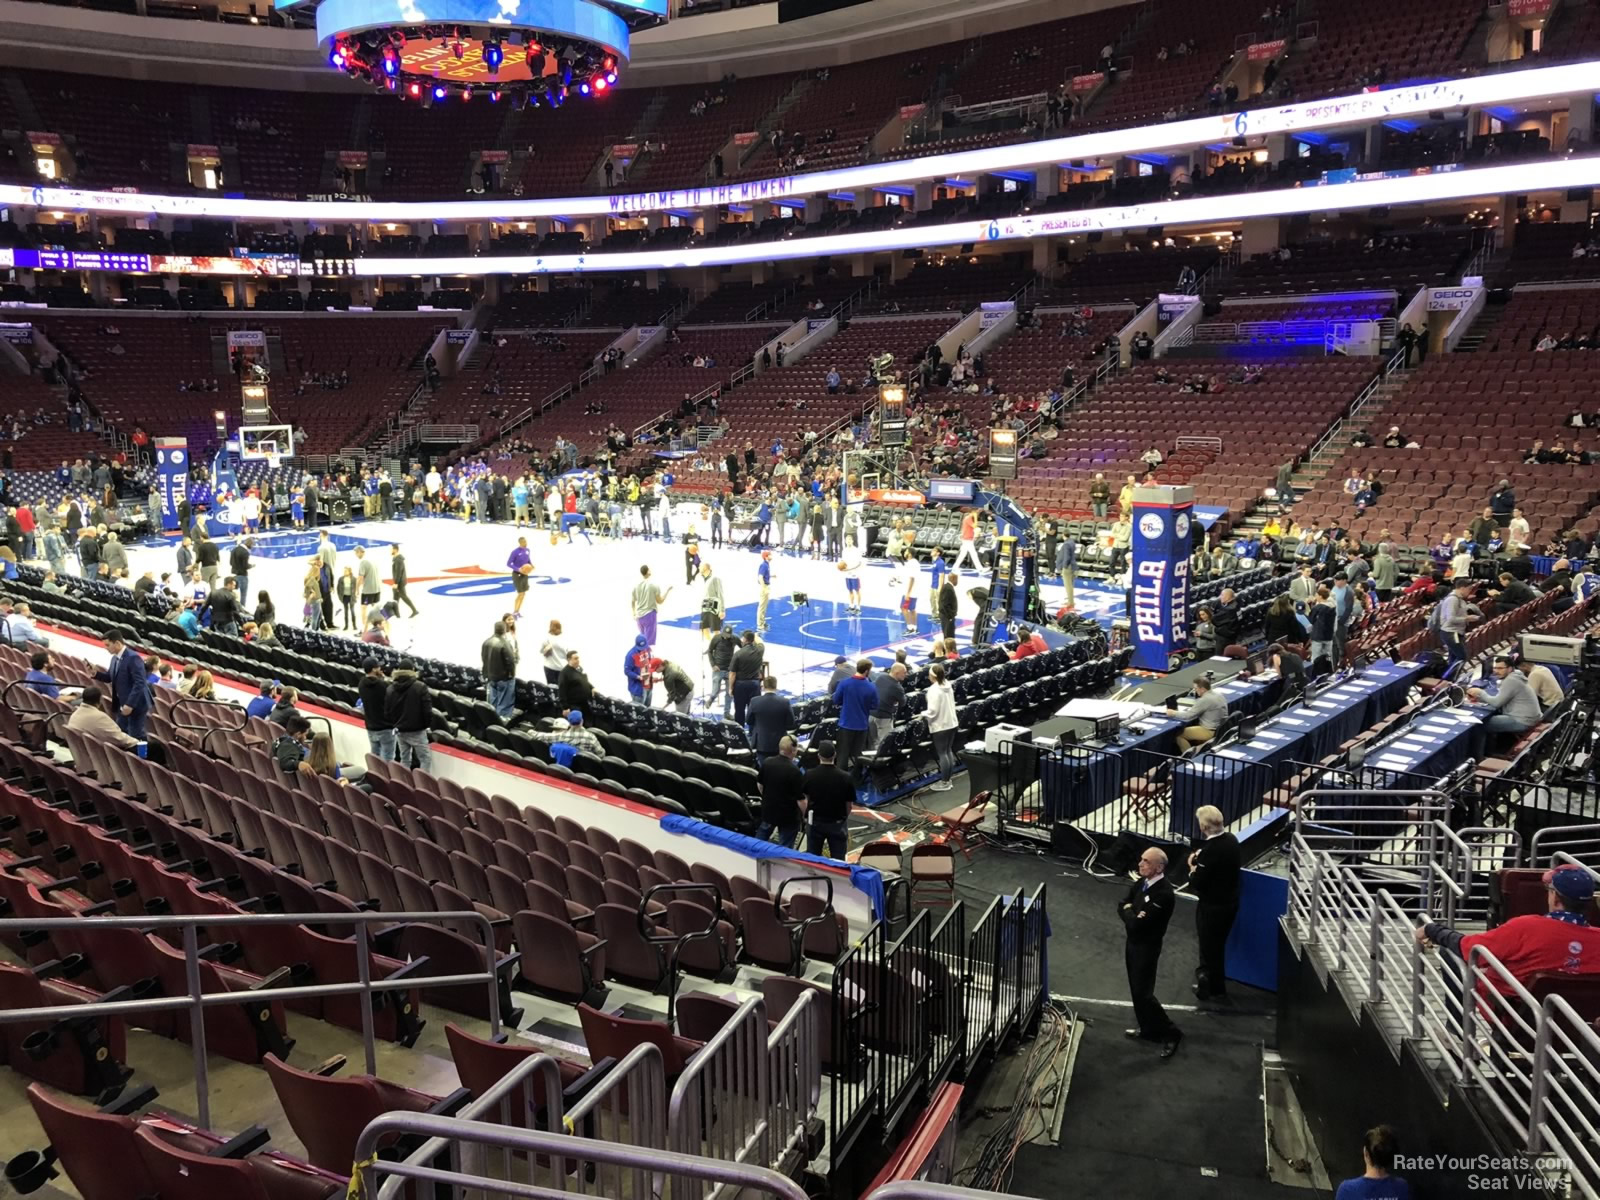 section 116, row 14 seat view  for basketball - wells fargo center